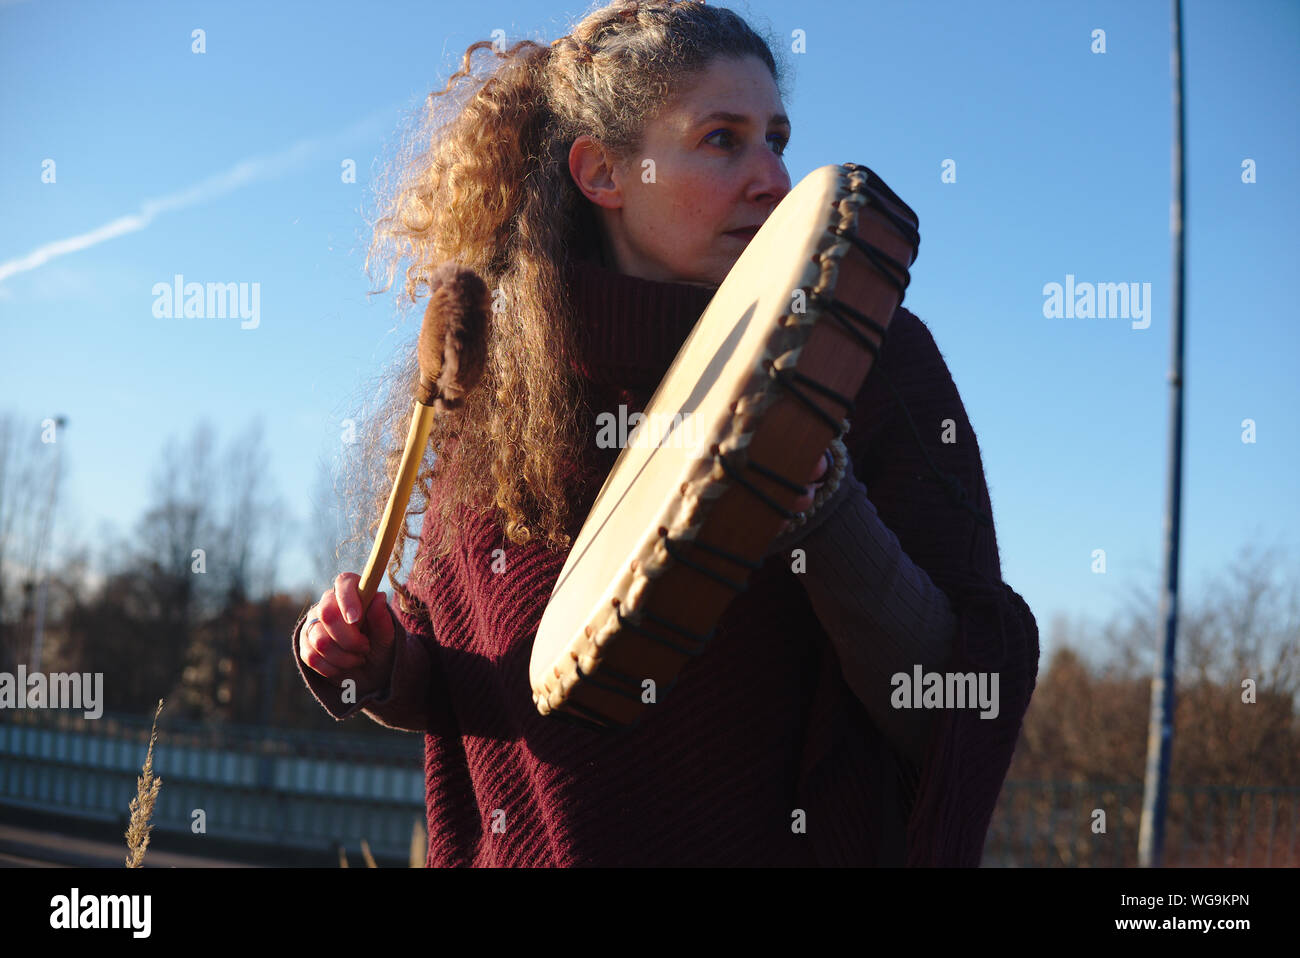 Woman Playing Musical Instrument While Standing Against Sky Stock Photo